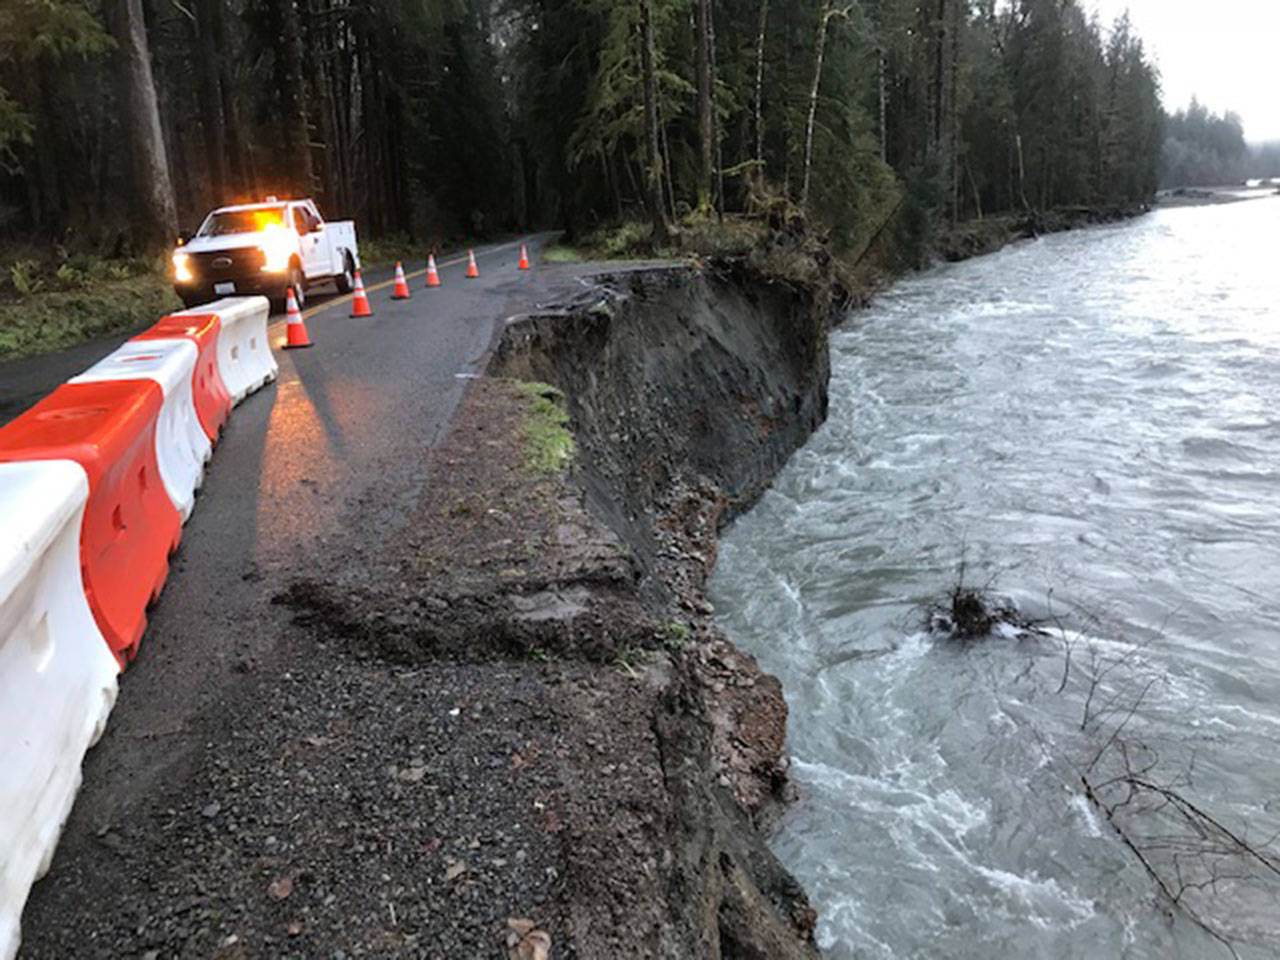 Jefferson County commissioners have declared a state of emergency for work on the Upper Hoh Road after a storm on Jan. 7 increased river flows and washed away a section of road that was 90 feet long by 20 feet wide. That portion of the roadway has been reduced to one lane. (Jefferson County Public Works Department)